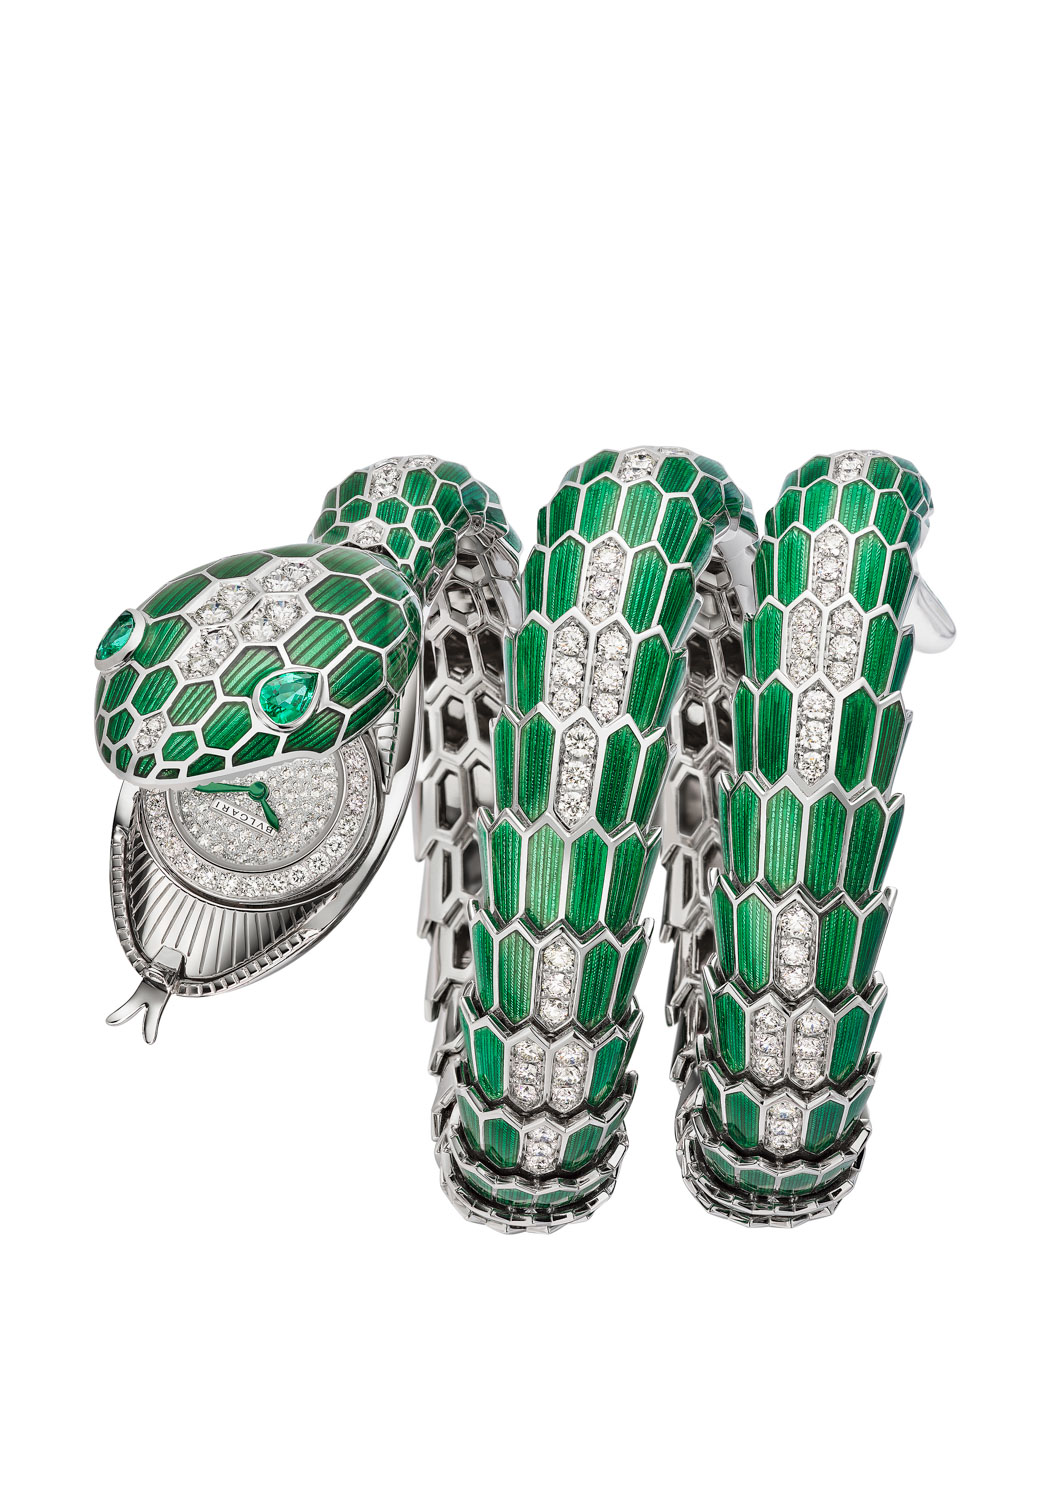 Serpenti Misteriosi High Jewellery Secret Watch in white gold case, green-lacquered and set with brilliant-cut diamonds, 2 pear-cut emeralds for the eyes (~0.4 ct), diamond-paved dial; green-lacquered white gold double-tour bracelet set with brilliant-cut diamonds. Total 369 diamonds (~8.35 cts)